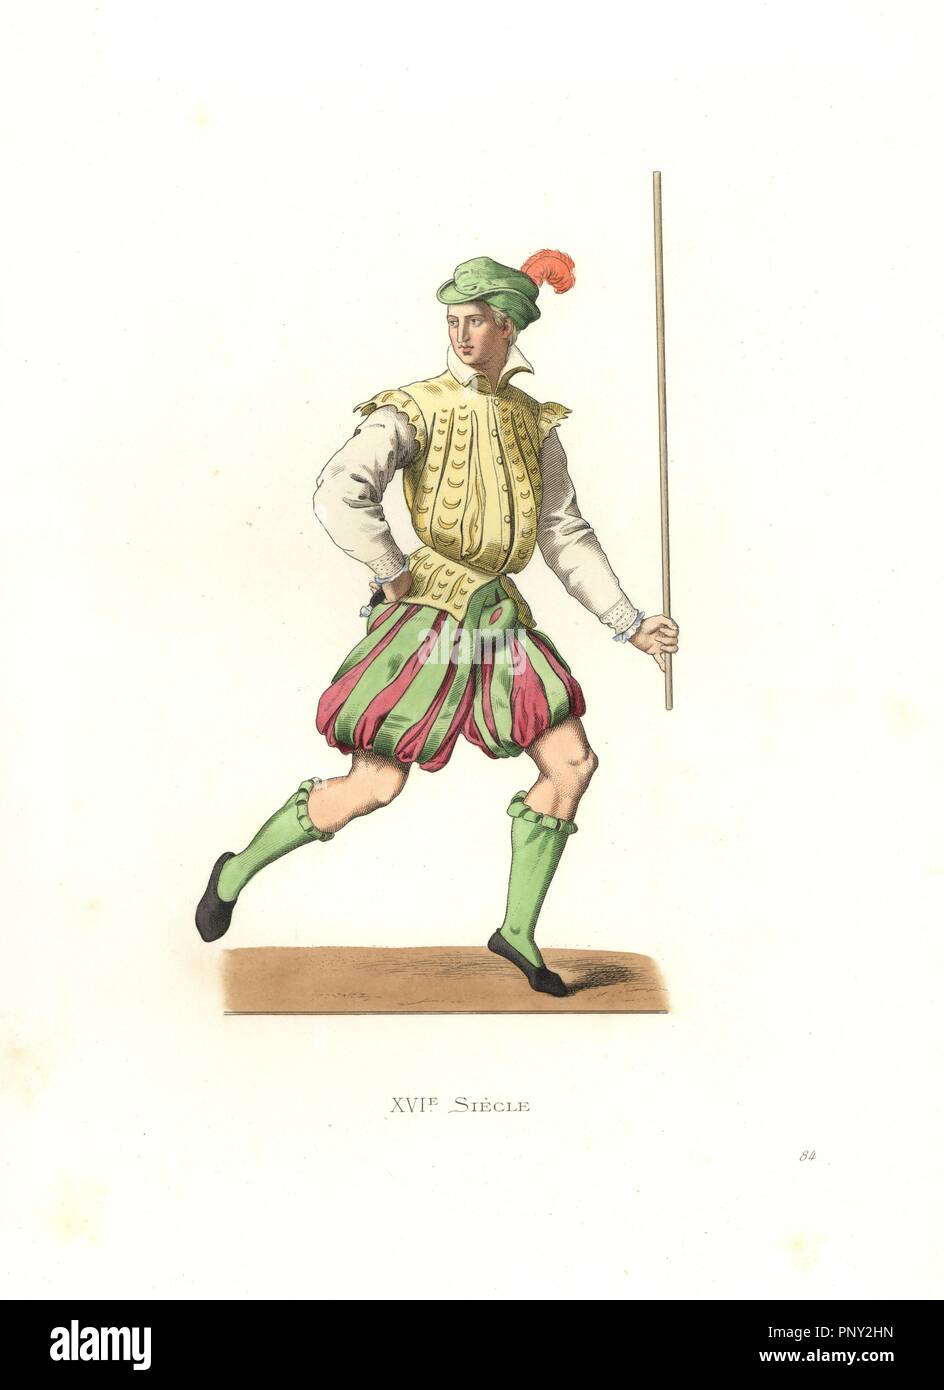 French lackey, 16th century. Handcolored illustration by E. Lechevallier-Chevignard, lithographed by A. Didier, L. Flameng, F. Laguillermie, from Georges Duplessis's 'Costumes historiques des XVIe, XVIIe et XVIIIe siecles' (Historical costumes of the 16th, 17th and 18th centuries), Paris 1867. The book was a continuation of the series on the costumes of the 12th to 15th centuries published by Camille Bonnard and Paul Mercuri from 1830. Georges Duplessis (1834-1899) was curator of the Prints department at the Bibliotheque nationale. Edmond Lechevallier-Chevignard (1825-1902) was an artist, book Stock Photo